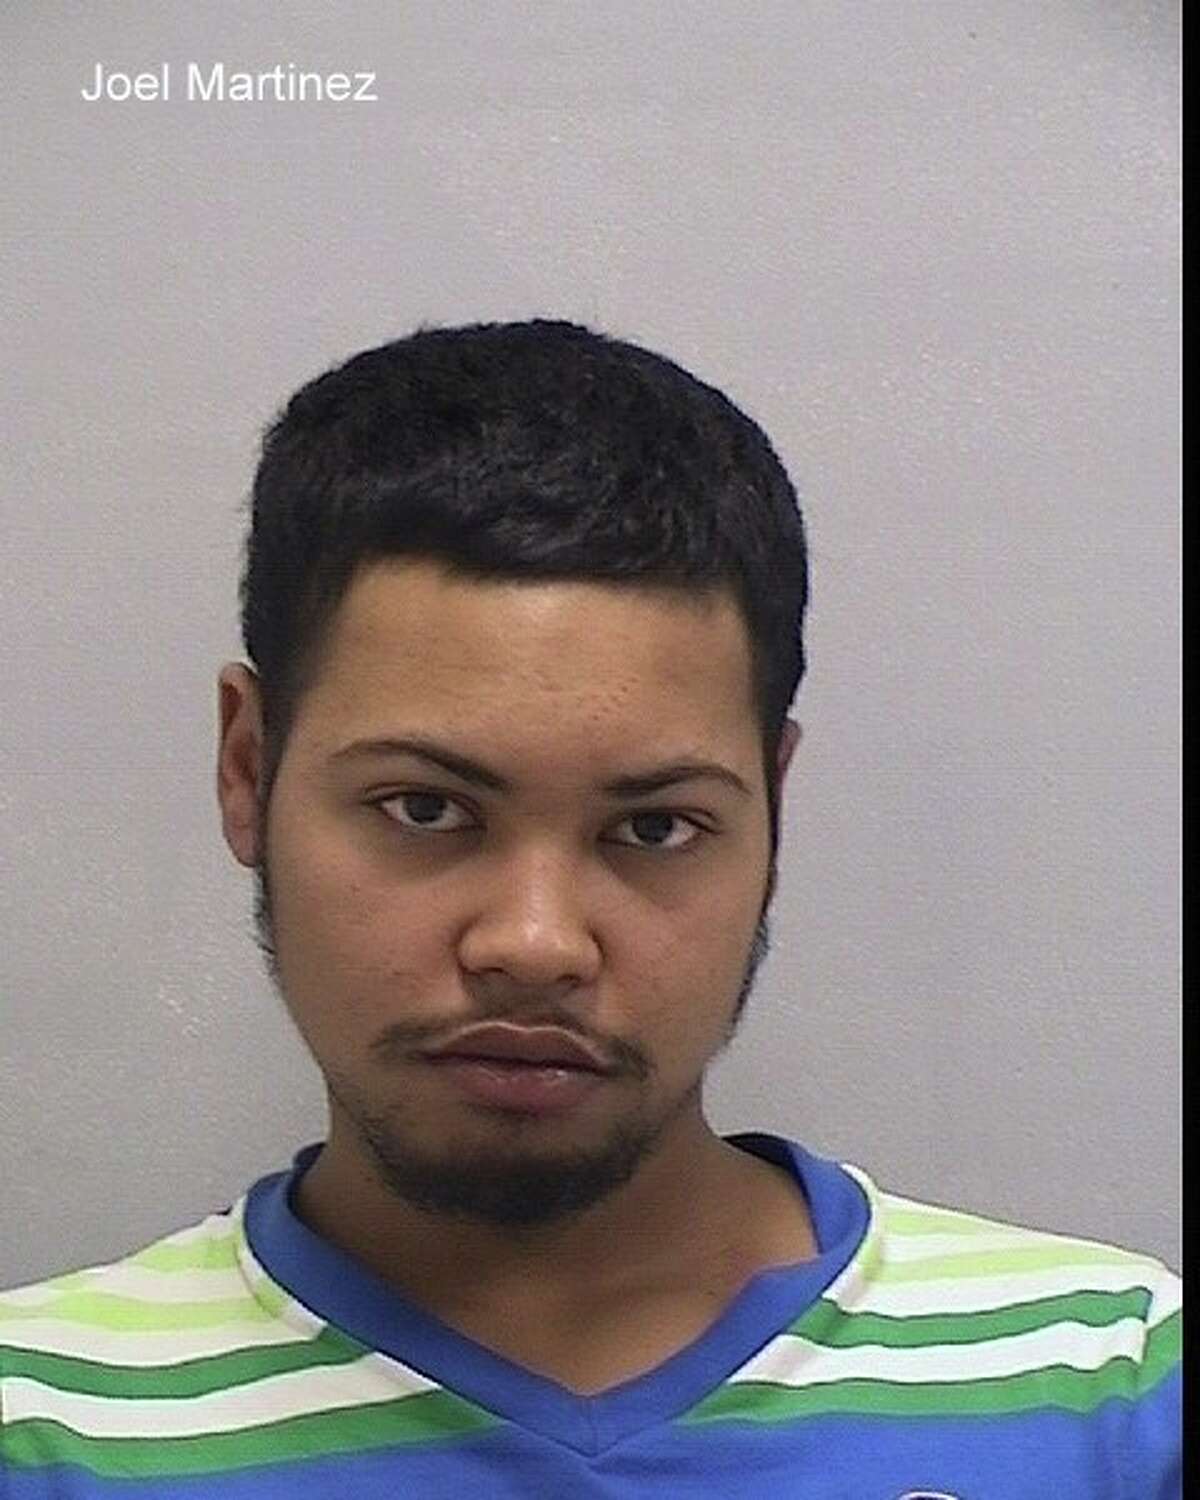 Joel Martinez, 20, of Bridgepport was charged with risk of injury to a minor and breach of peace charges after a disturbance at Chip’s Restaurant in Orange on Saturday, Oct. 17, 2015.